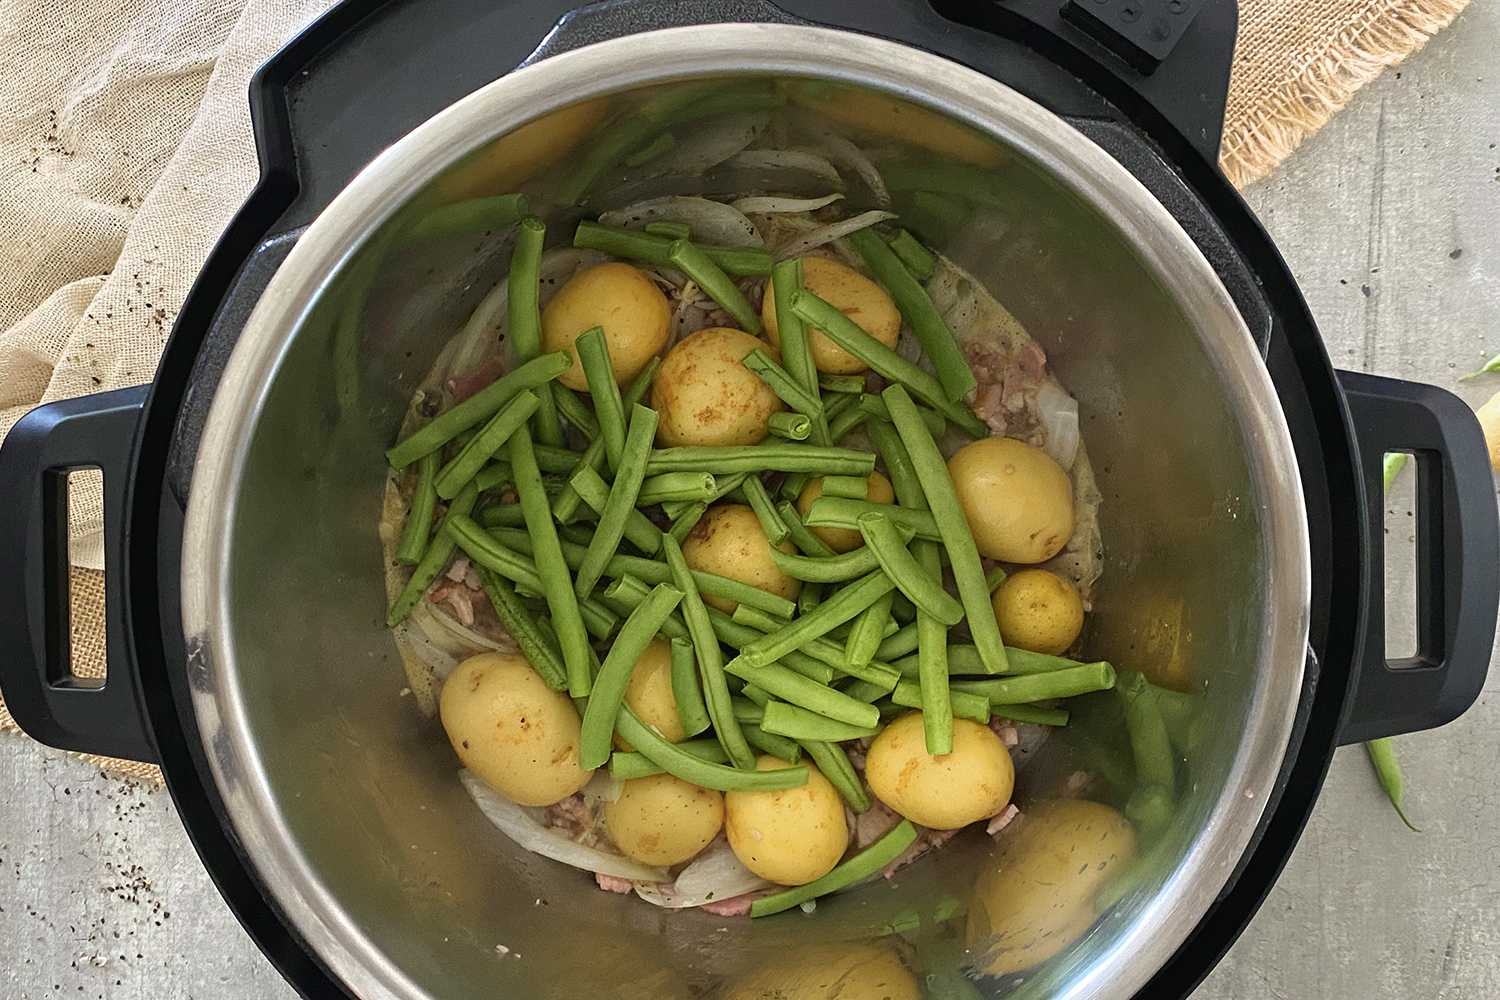 How Long To Cook Green Beans And Potatoes In Electric Pressure Cooker